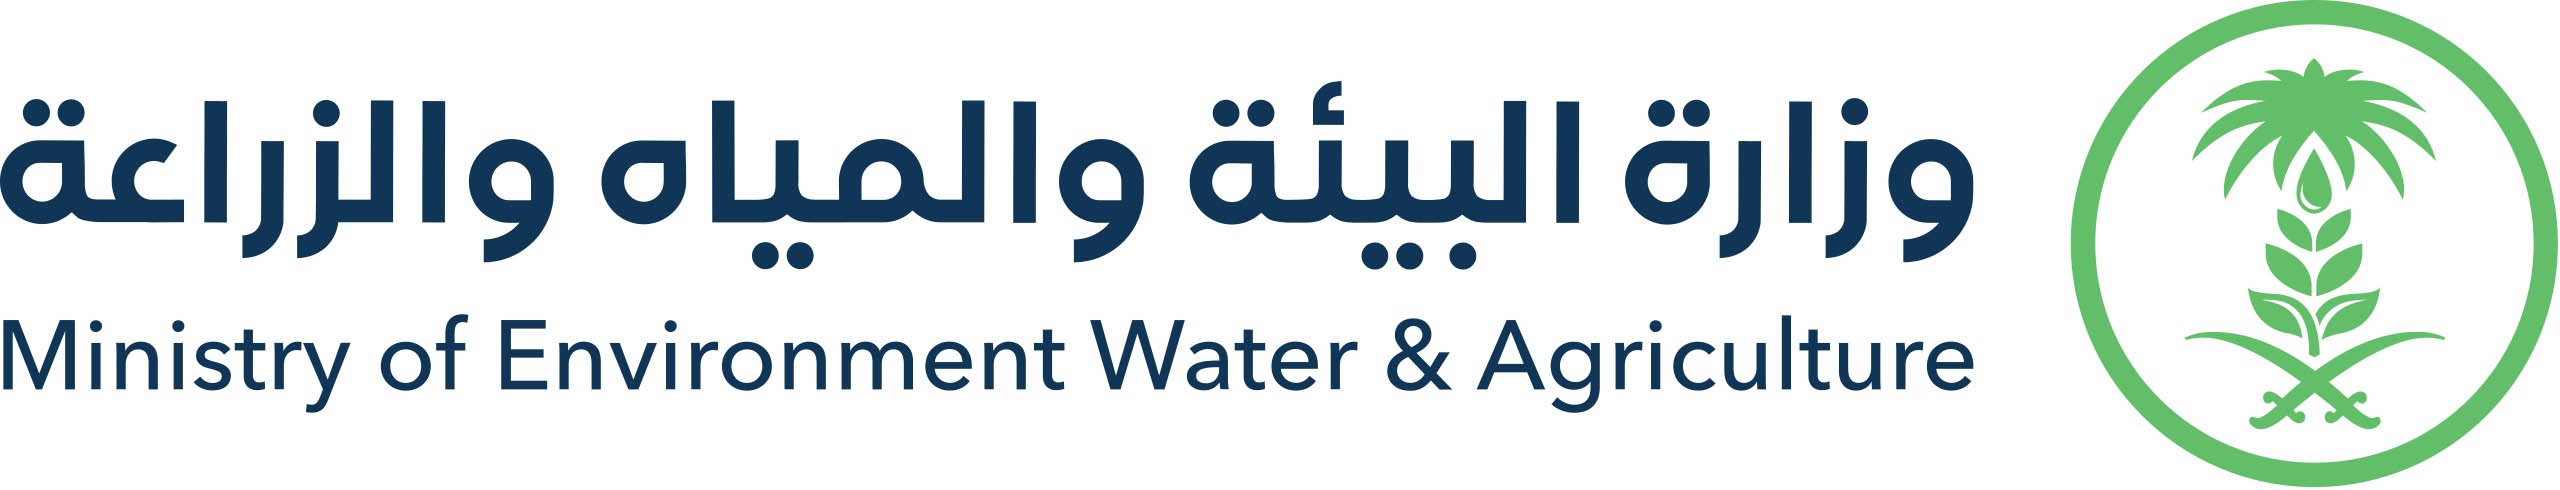 Environmental Permitting in Middle East - Ministry of Environment Water & Agriculture logo